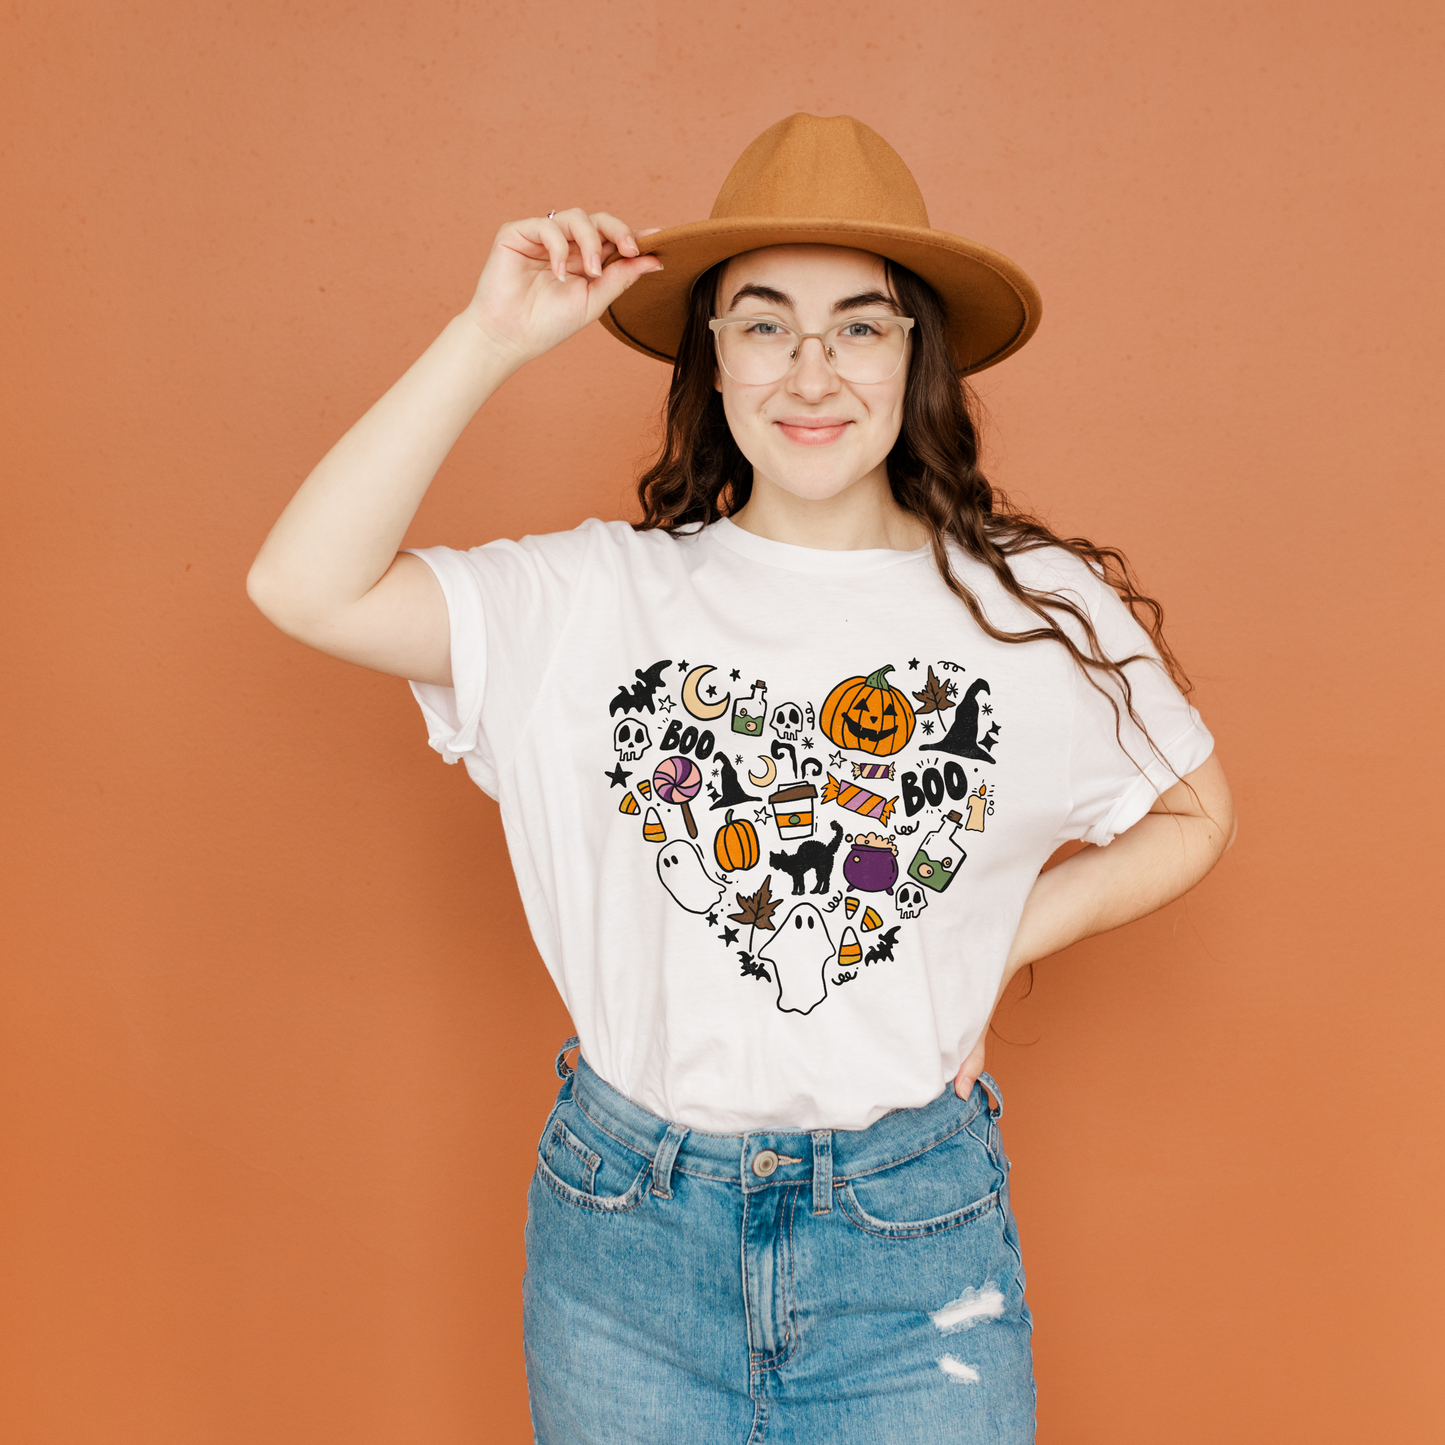 Load image into Gallery viewer, Halloween Heart Tee
